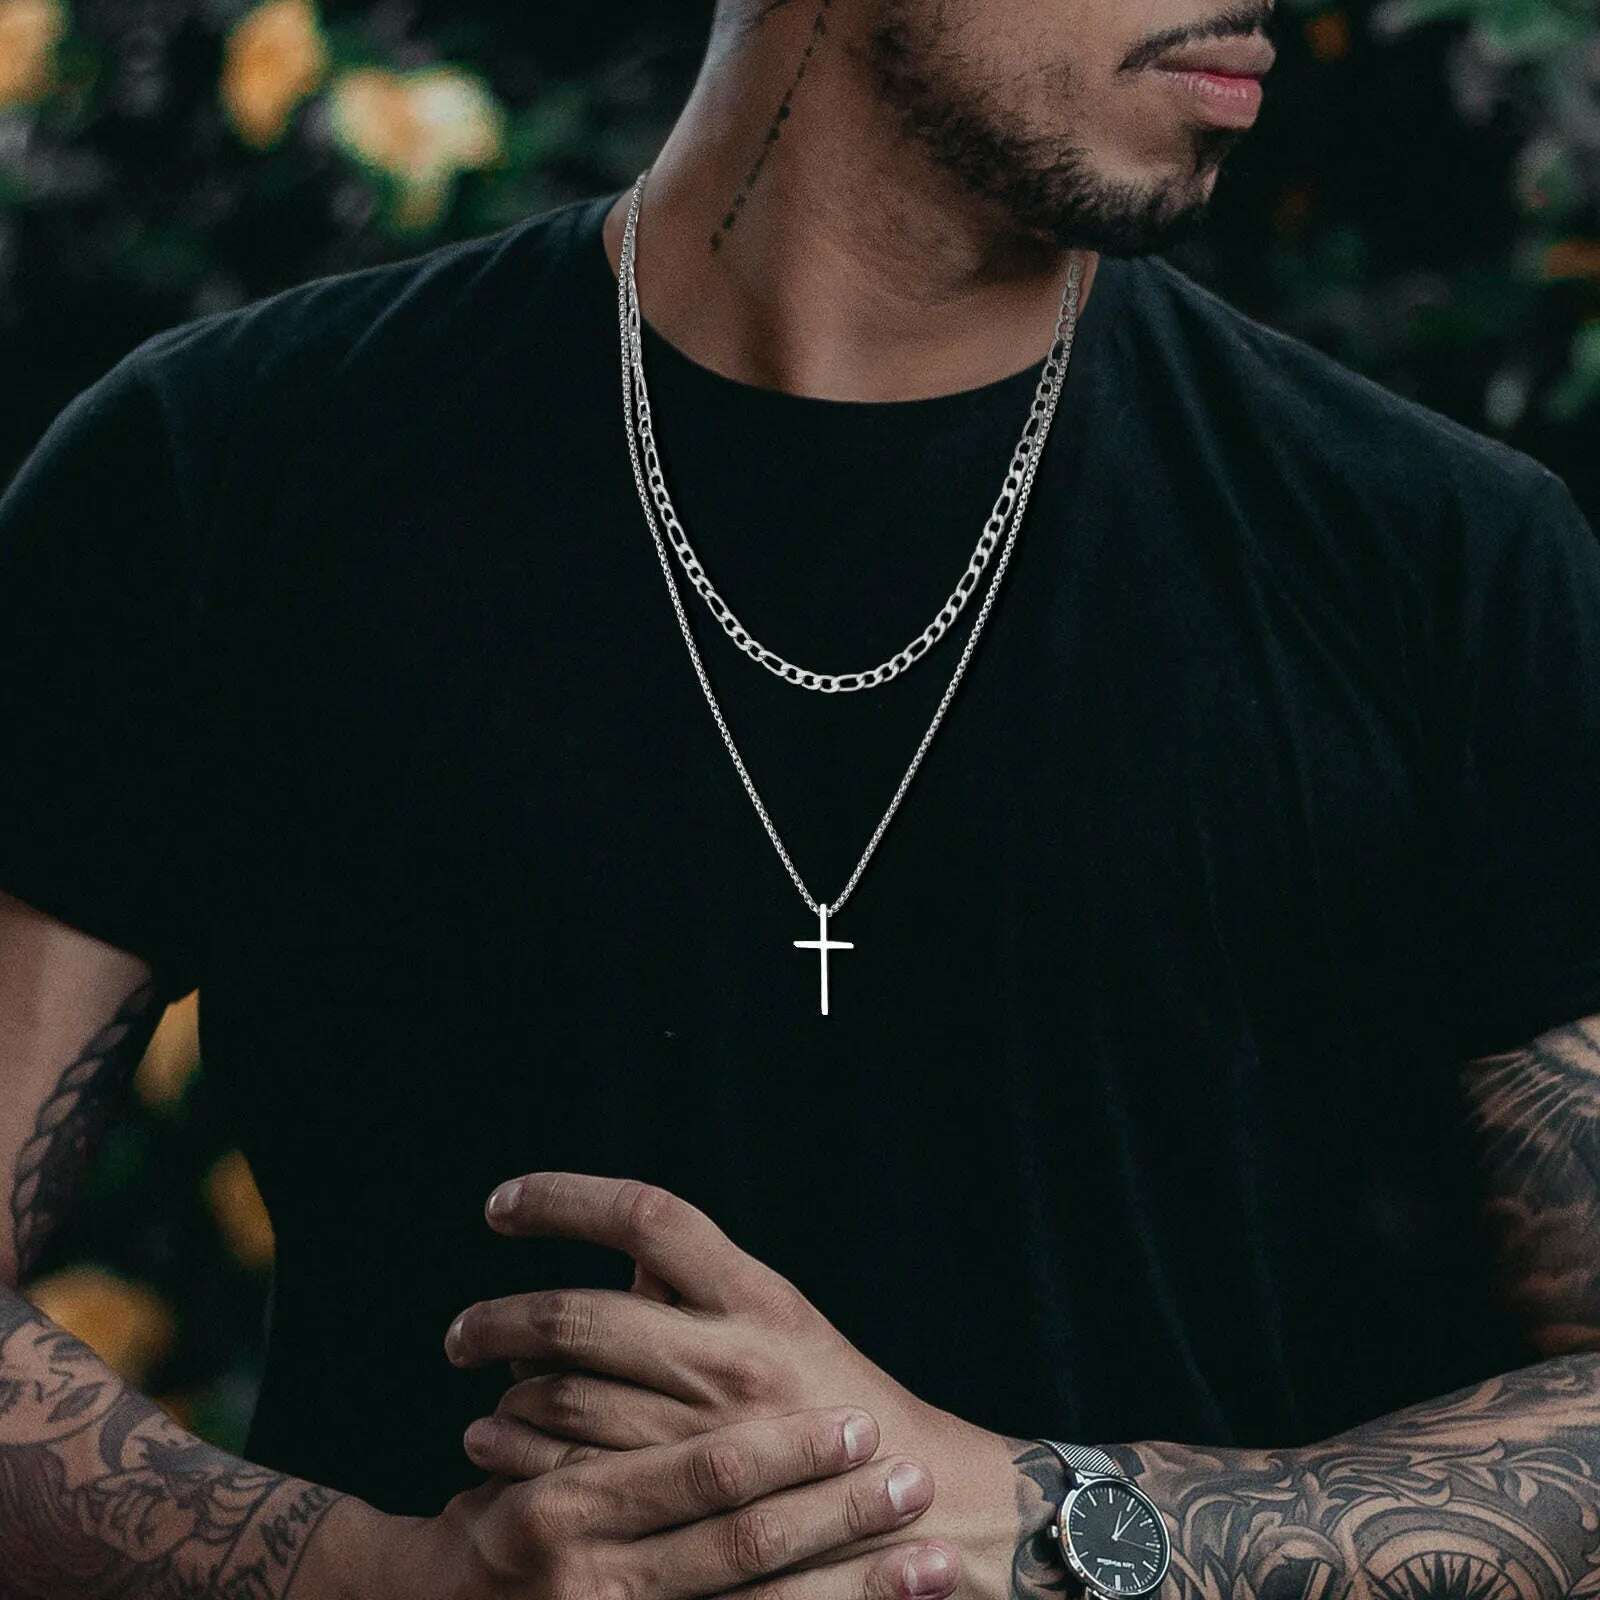 KIMLUD, Vnox Mens Cross Necklaces, Stainless Steel Layered Plain Cross Pendant, Rope Box Chain Necklace, Simple Prayer Jesus Collar, KIMLUD Womens Clothes